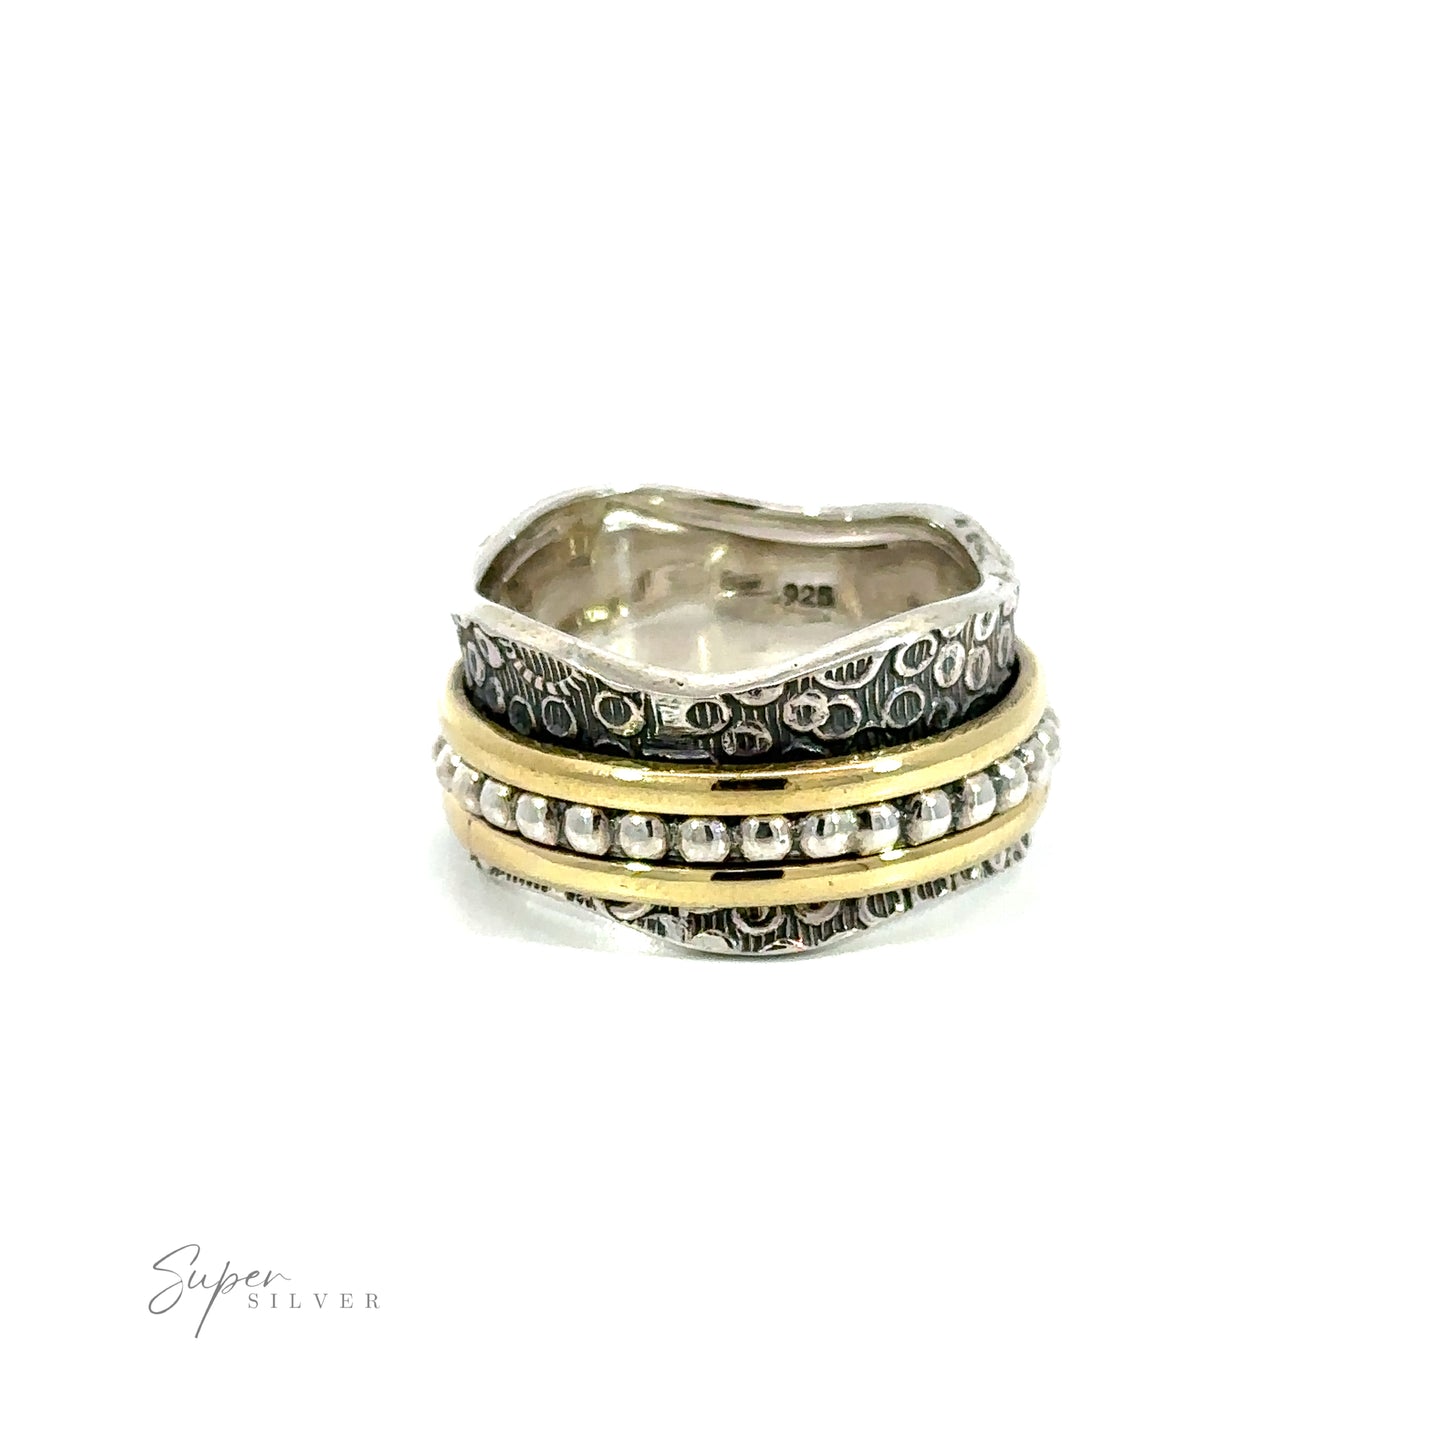 An Octopus Scale Handmade Etched Spinner Ring with 2 Gold Bands with a silver band and gold and silver beads.